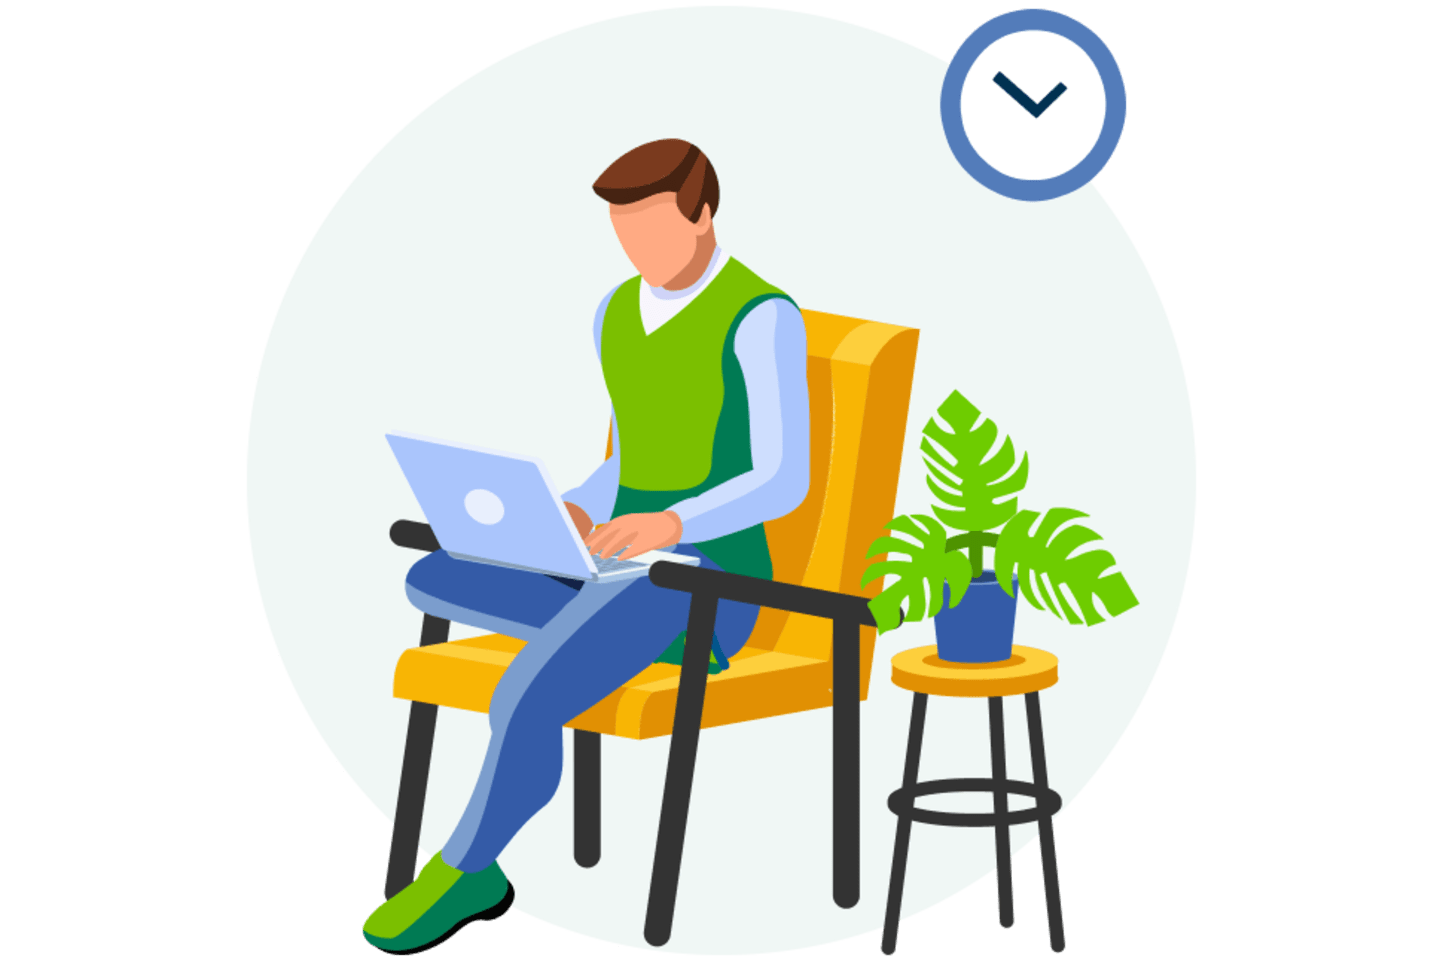 Illustration of man with laptop sitting in chair.